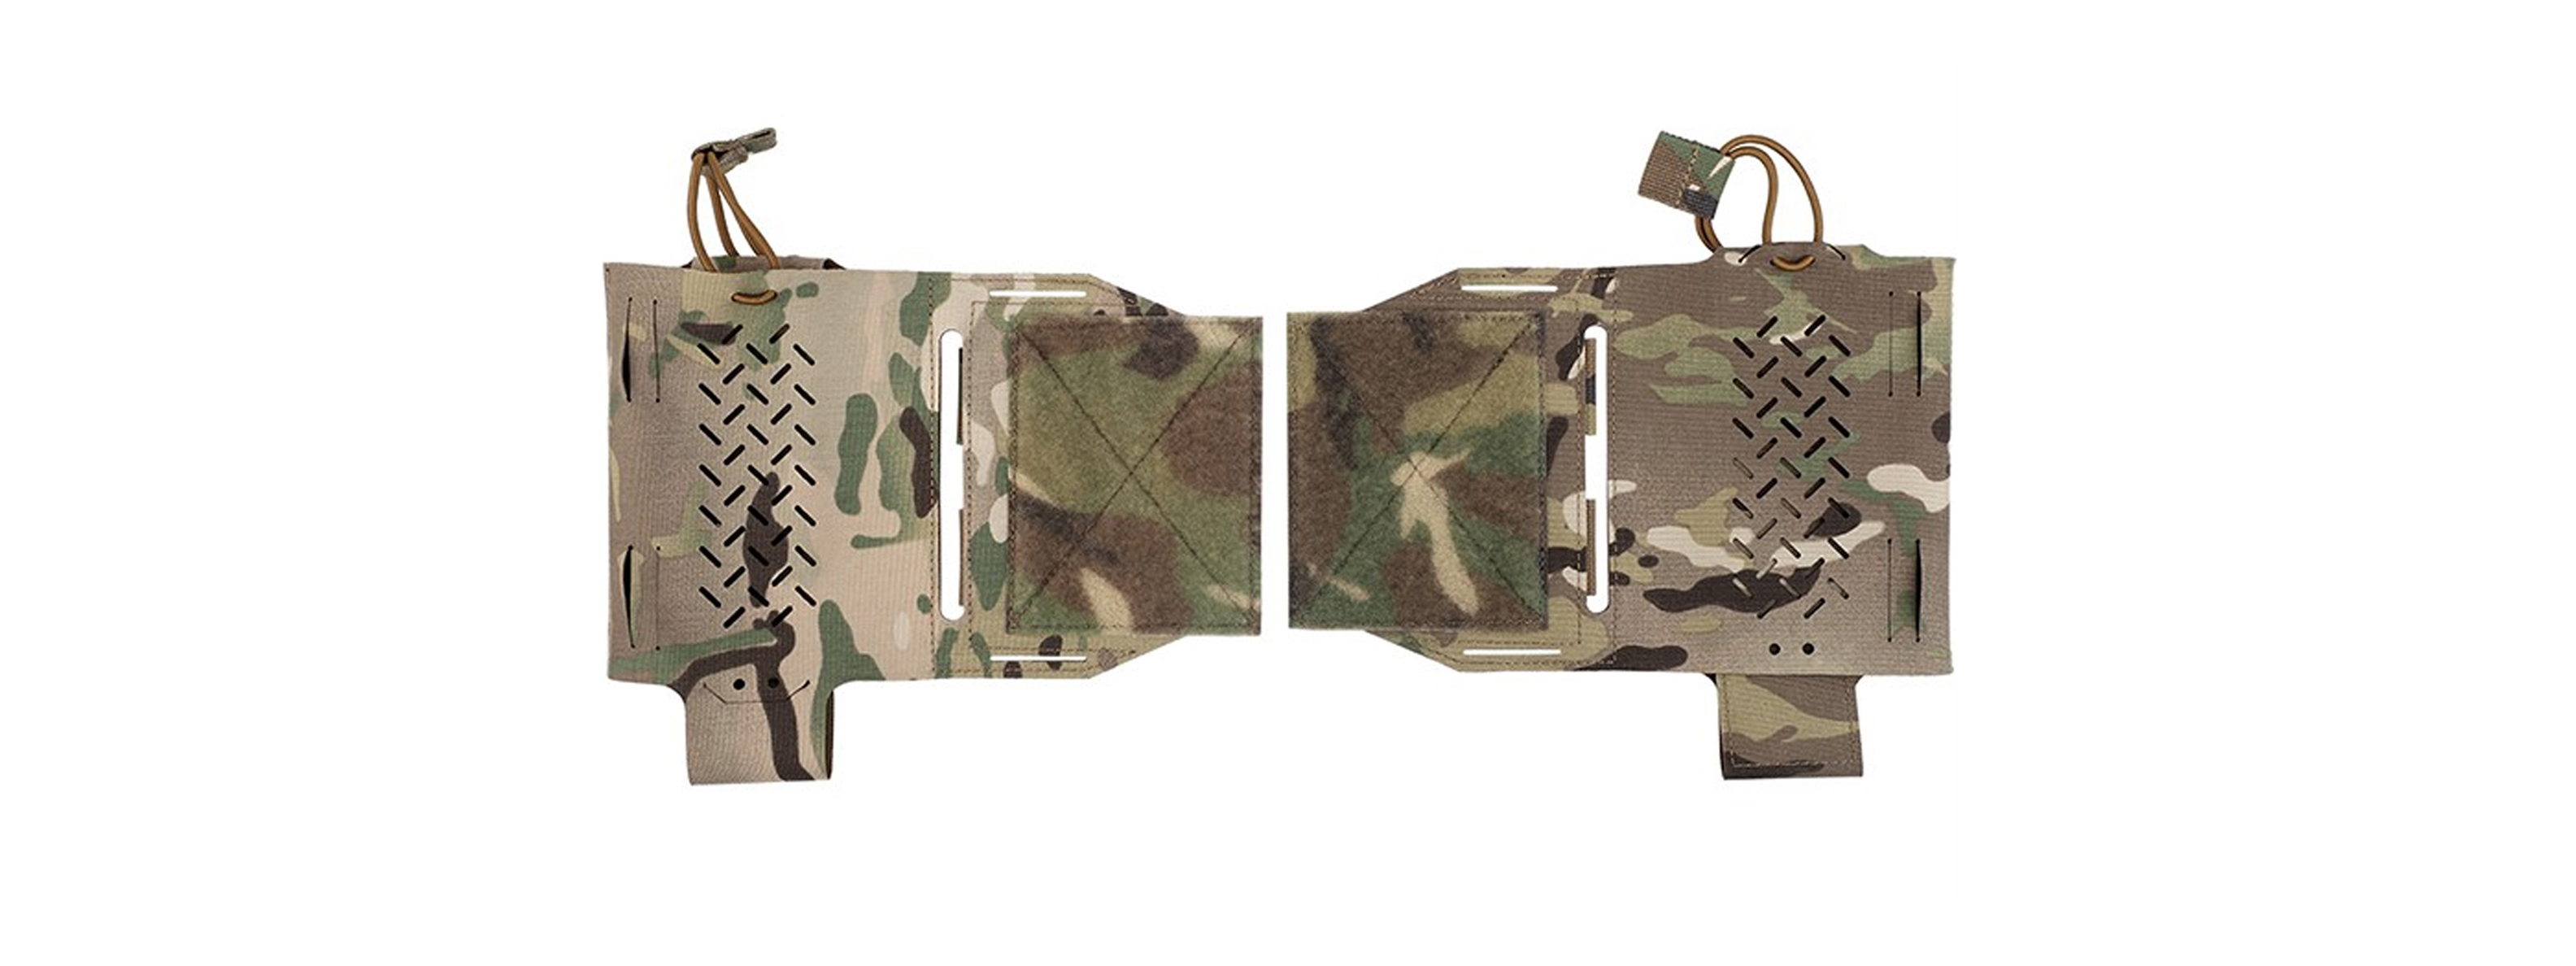 MK2 Expander Wing Pouches For Tactical Vests - (Camo)